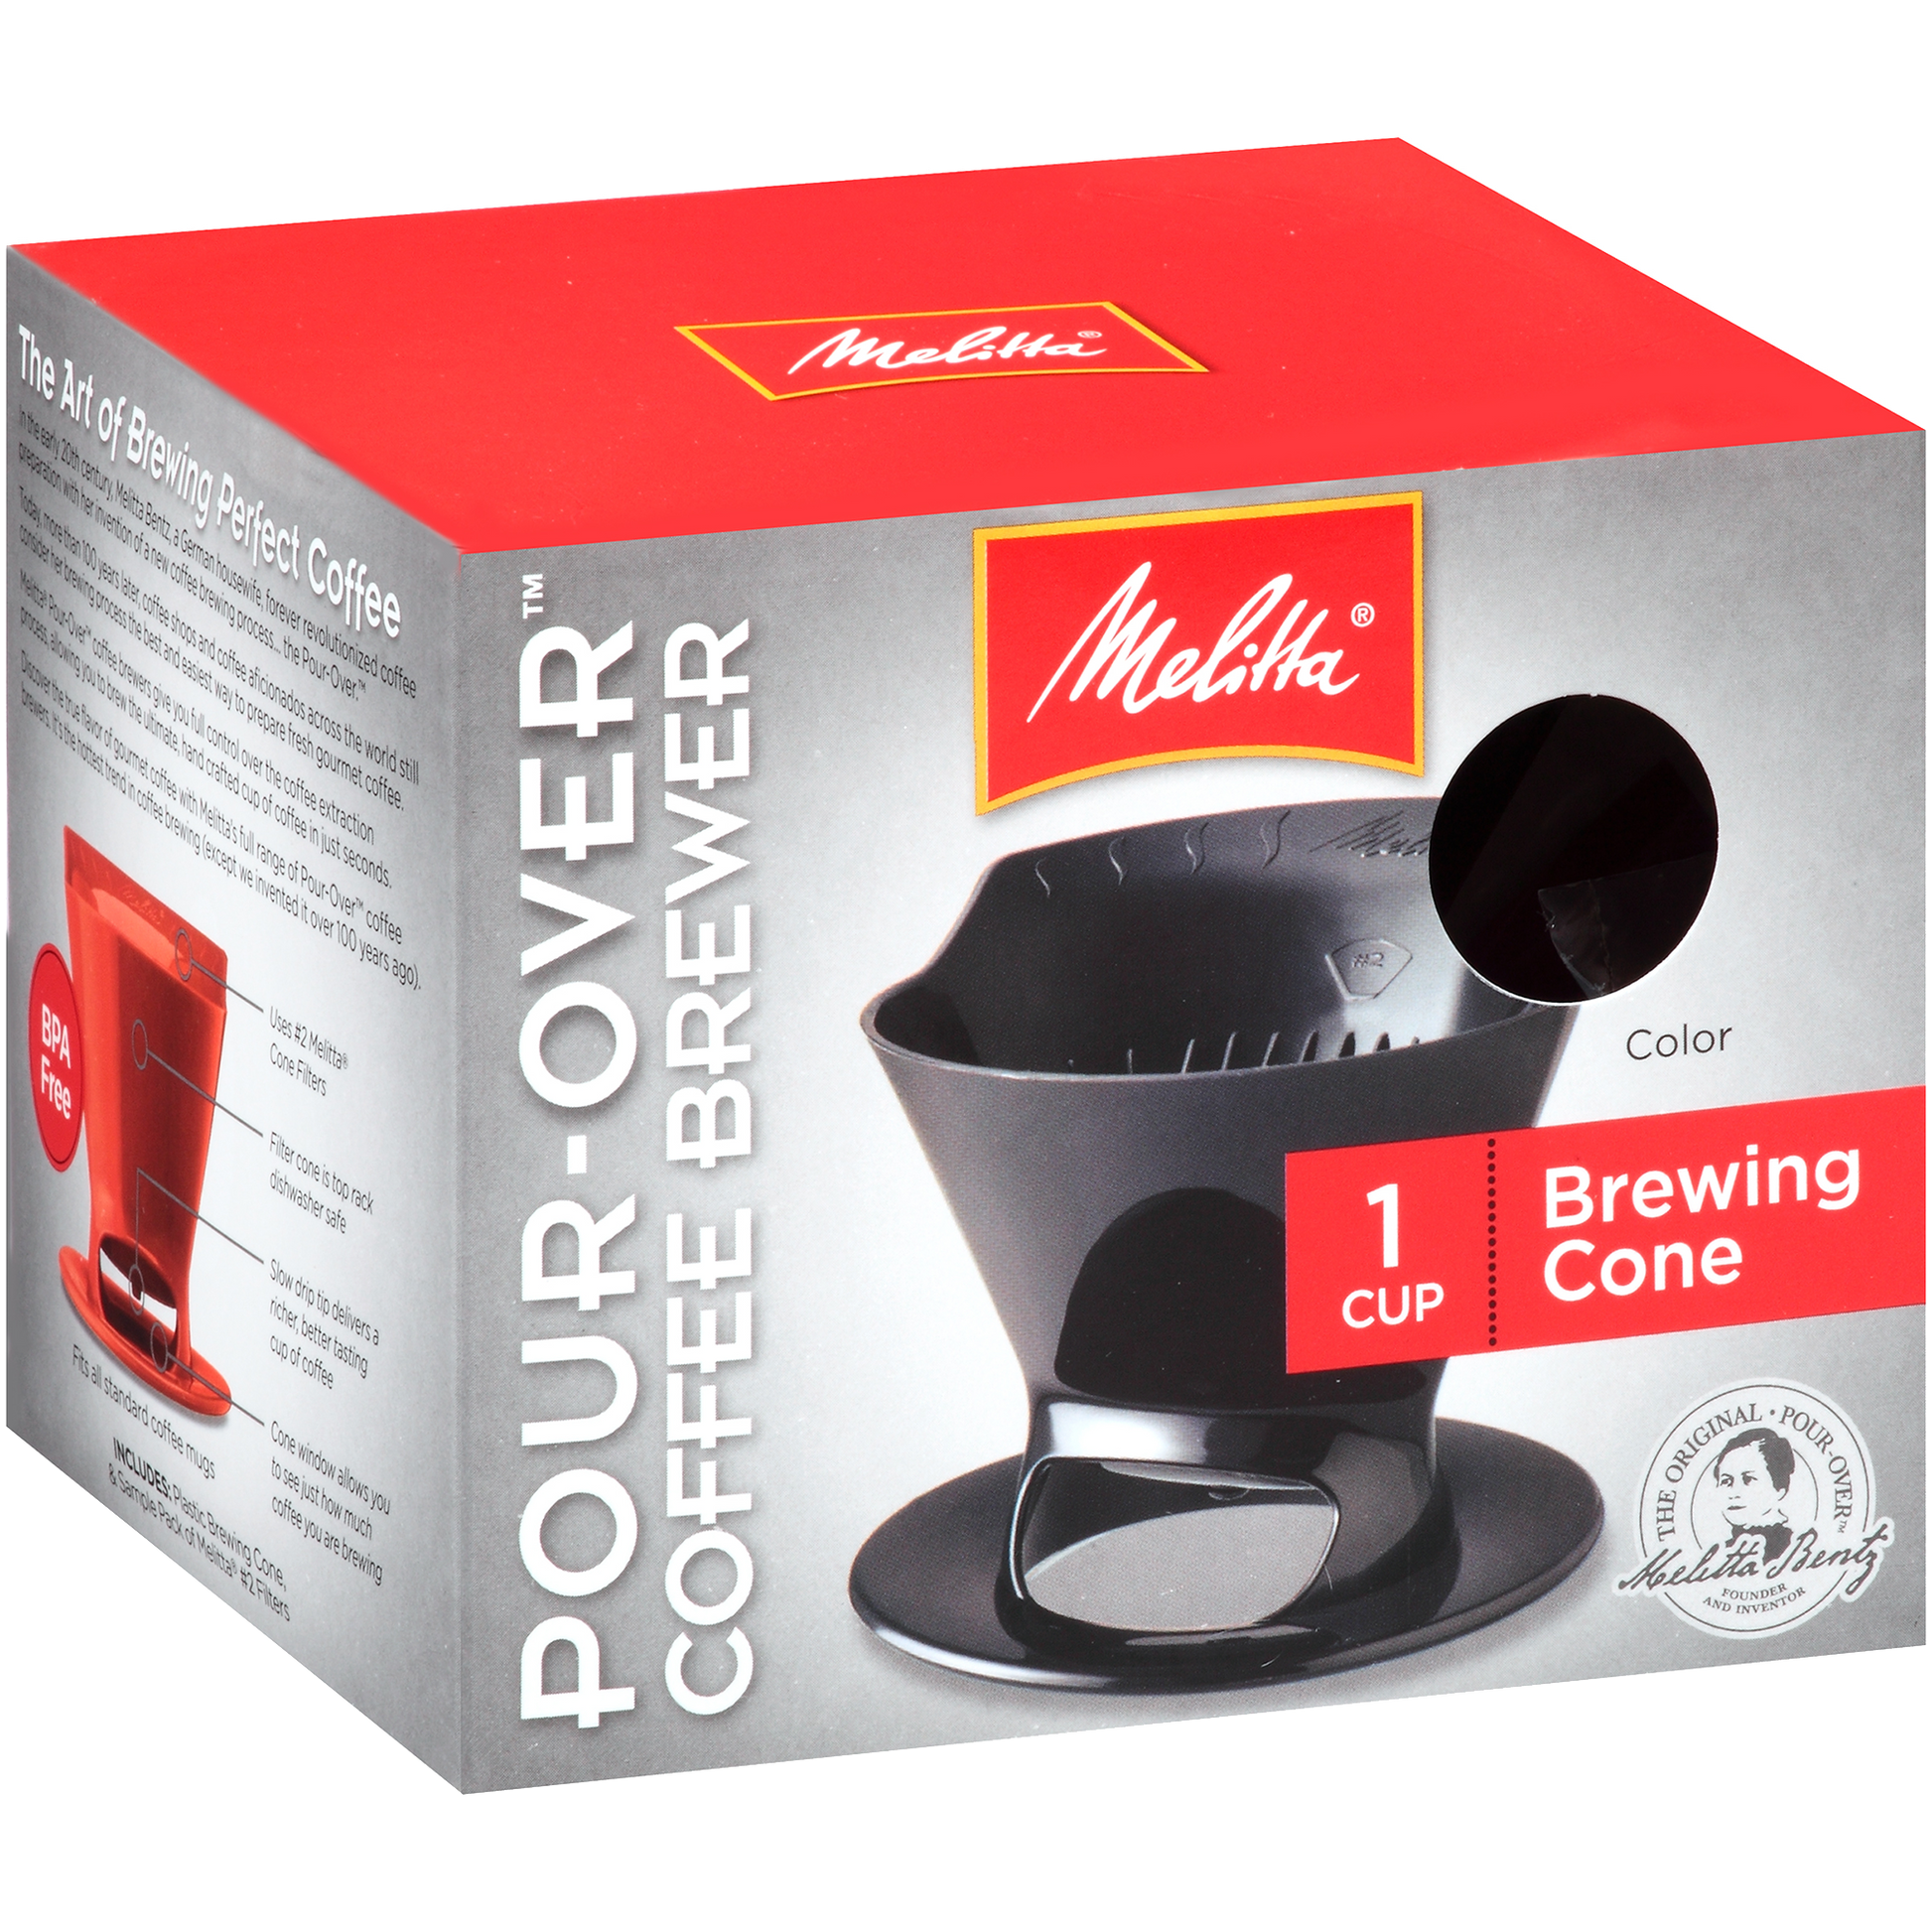 15 12-volt coffee makers for RV's (And other options for a cup of joe)